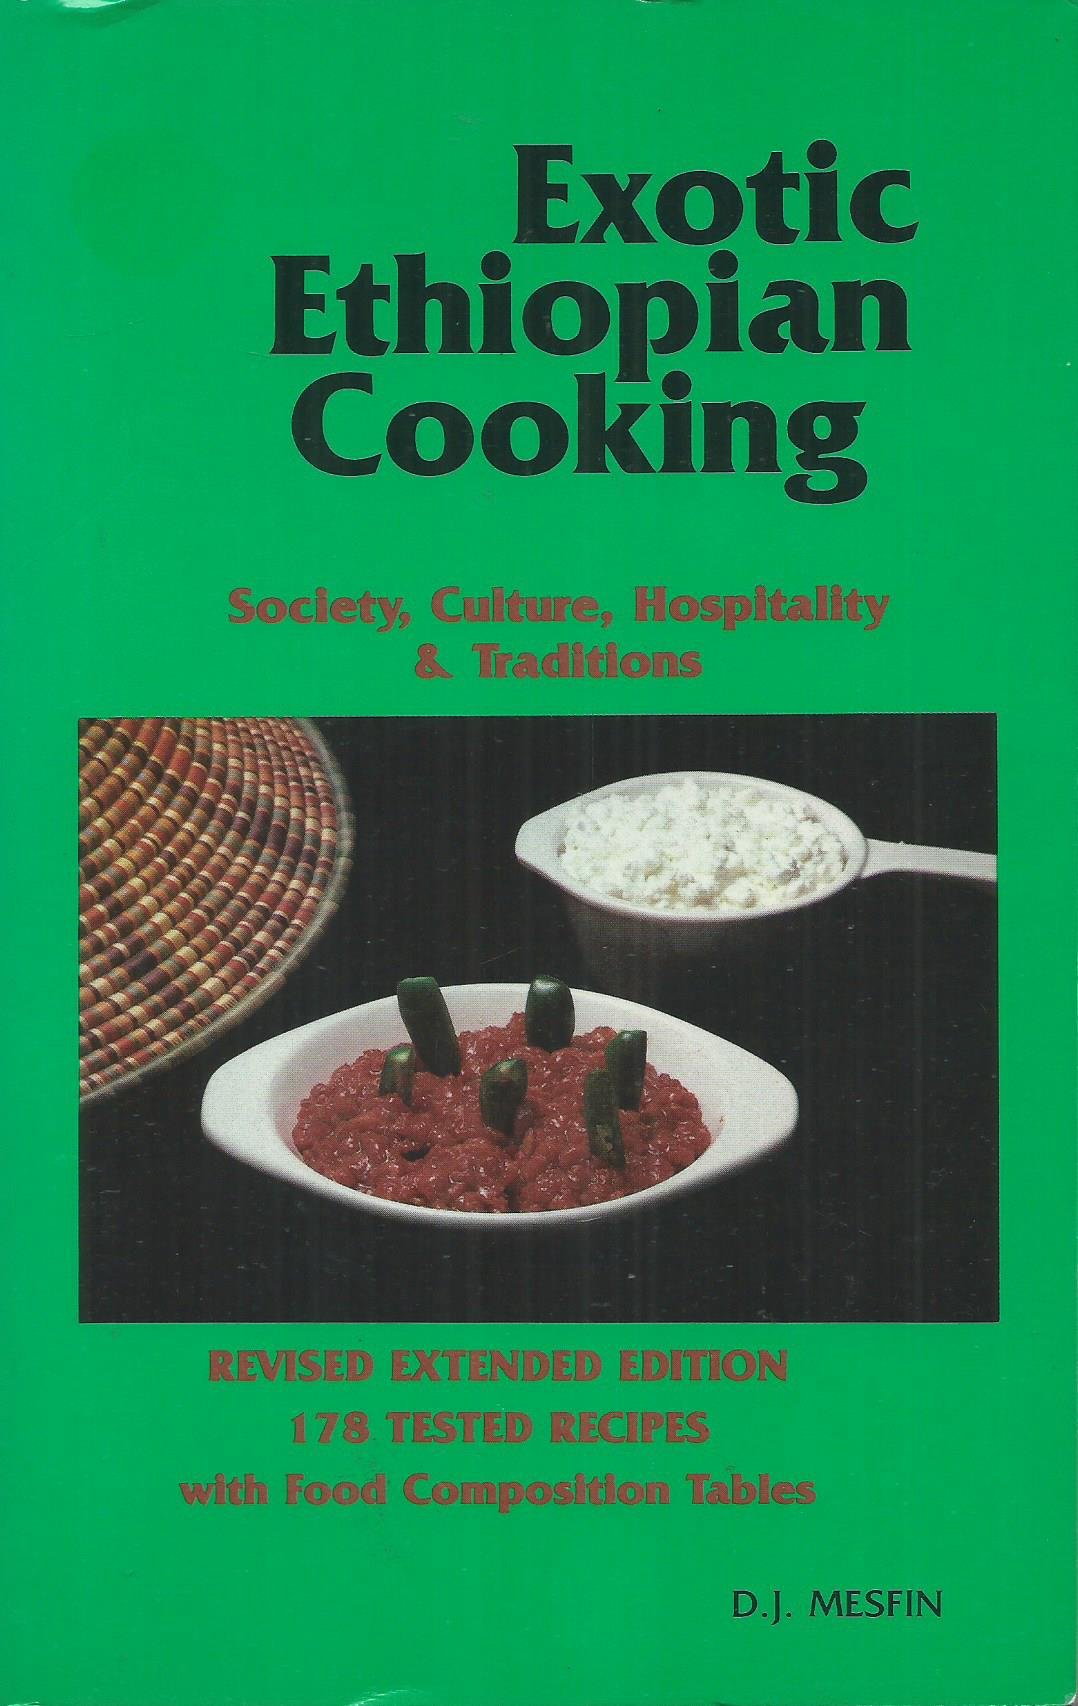 Exotic Ethiopian Cooking: Society, Culture, Hospitality & Traditions (Daniel J. Mesfin)